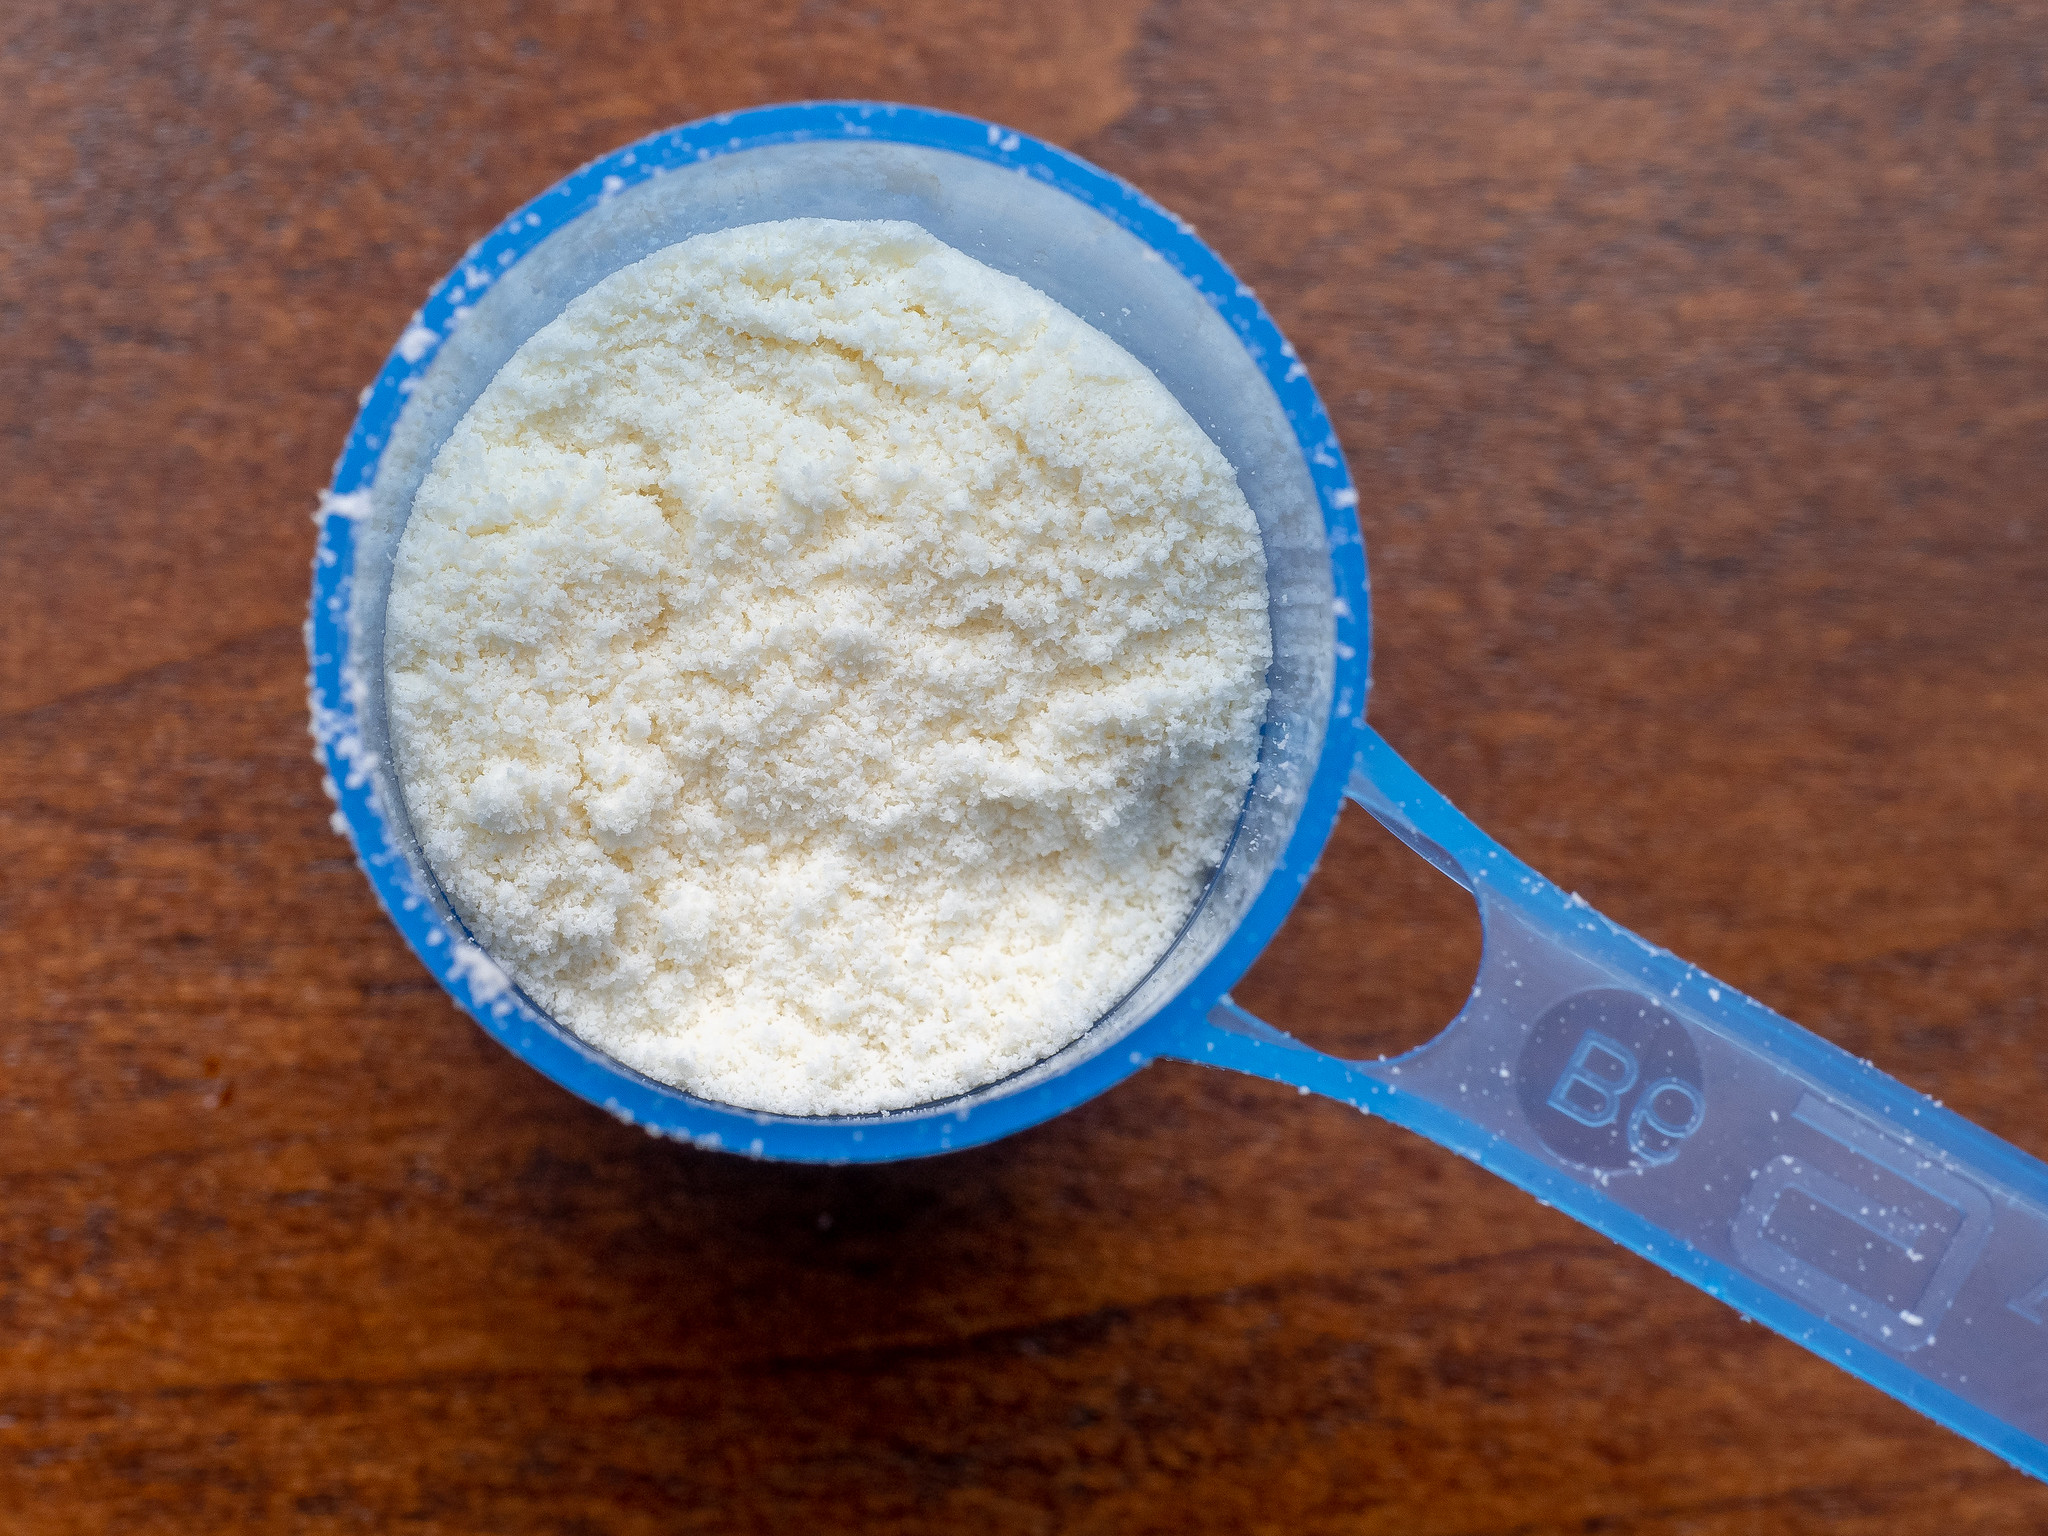 A measuring cup full of powdered baby formula